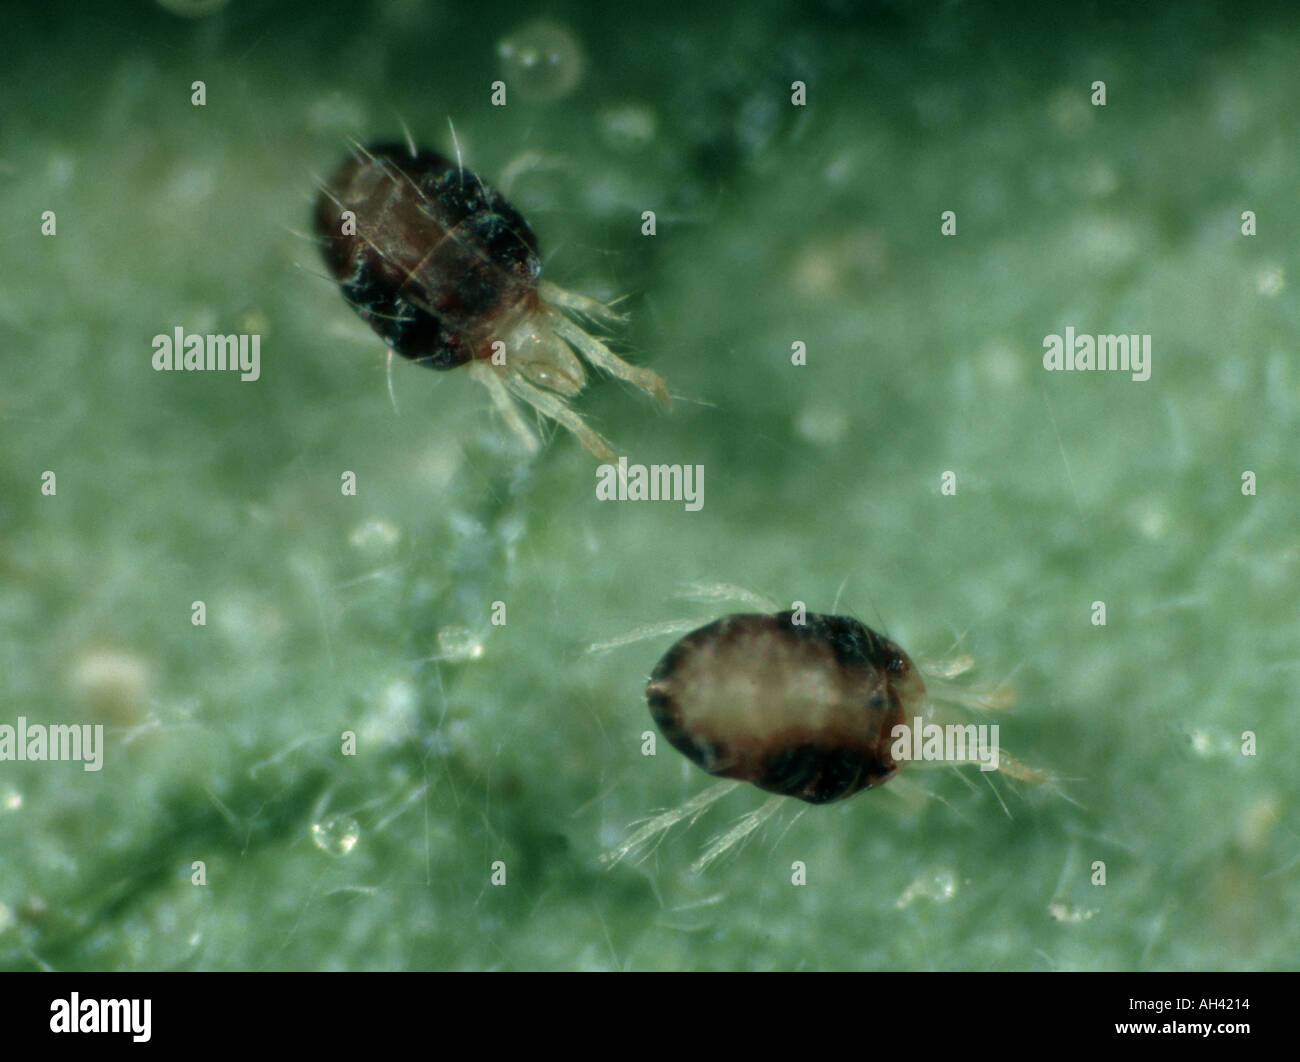 Two female adult carmine red spider mites Tetranychus cinnabarinus on a leaf surface Stock Photo